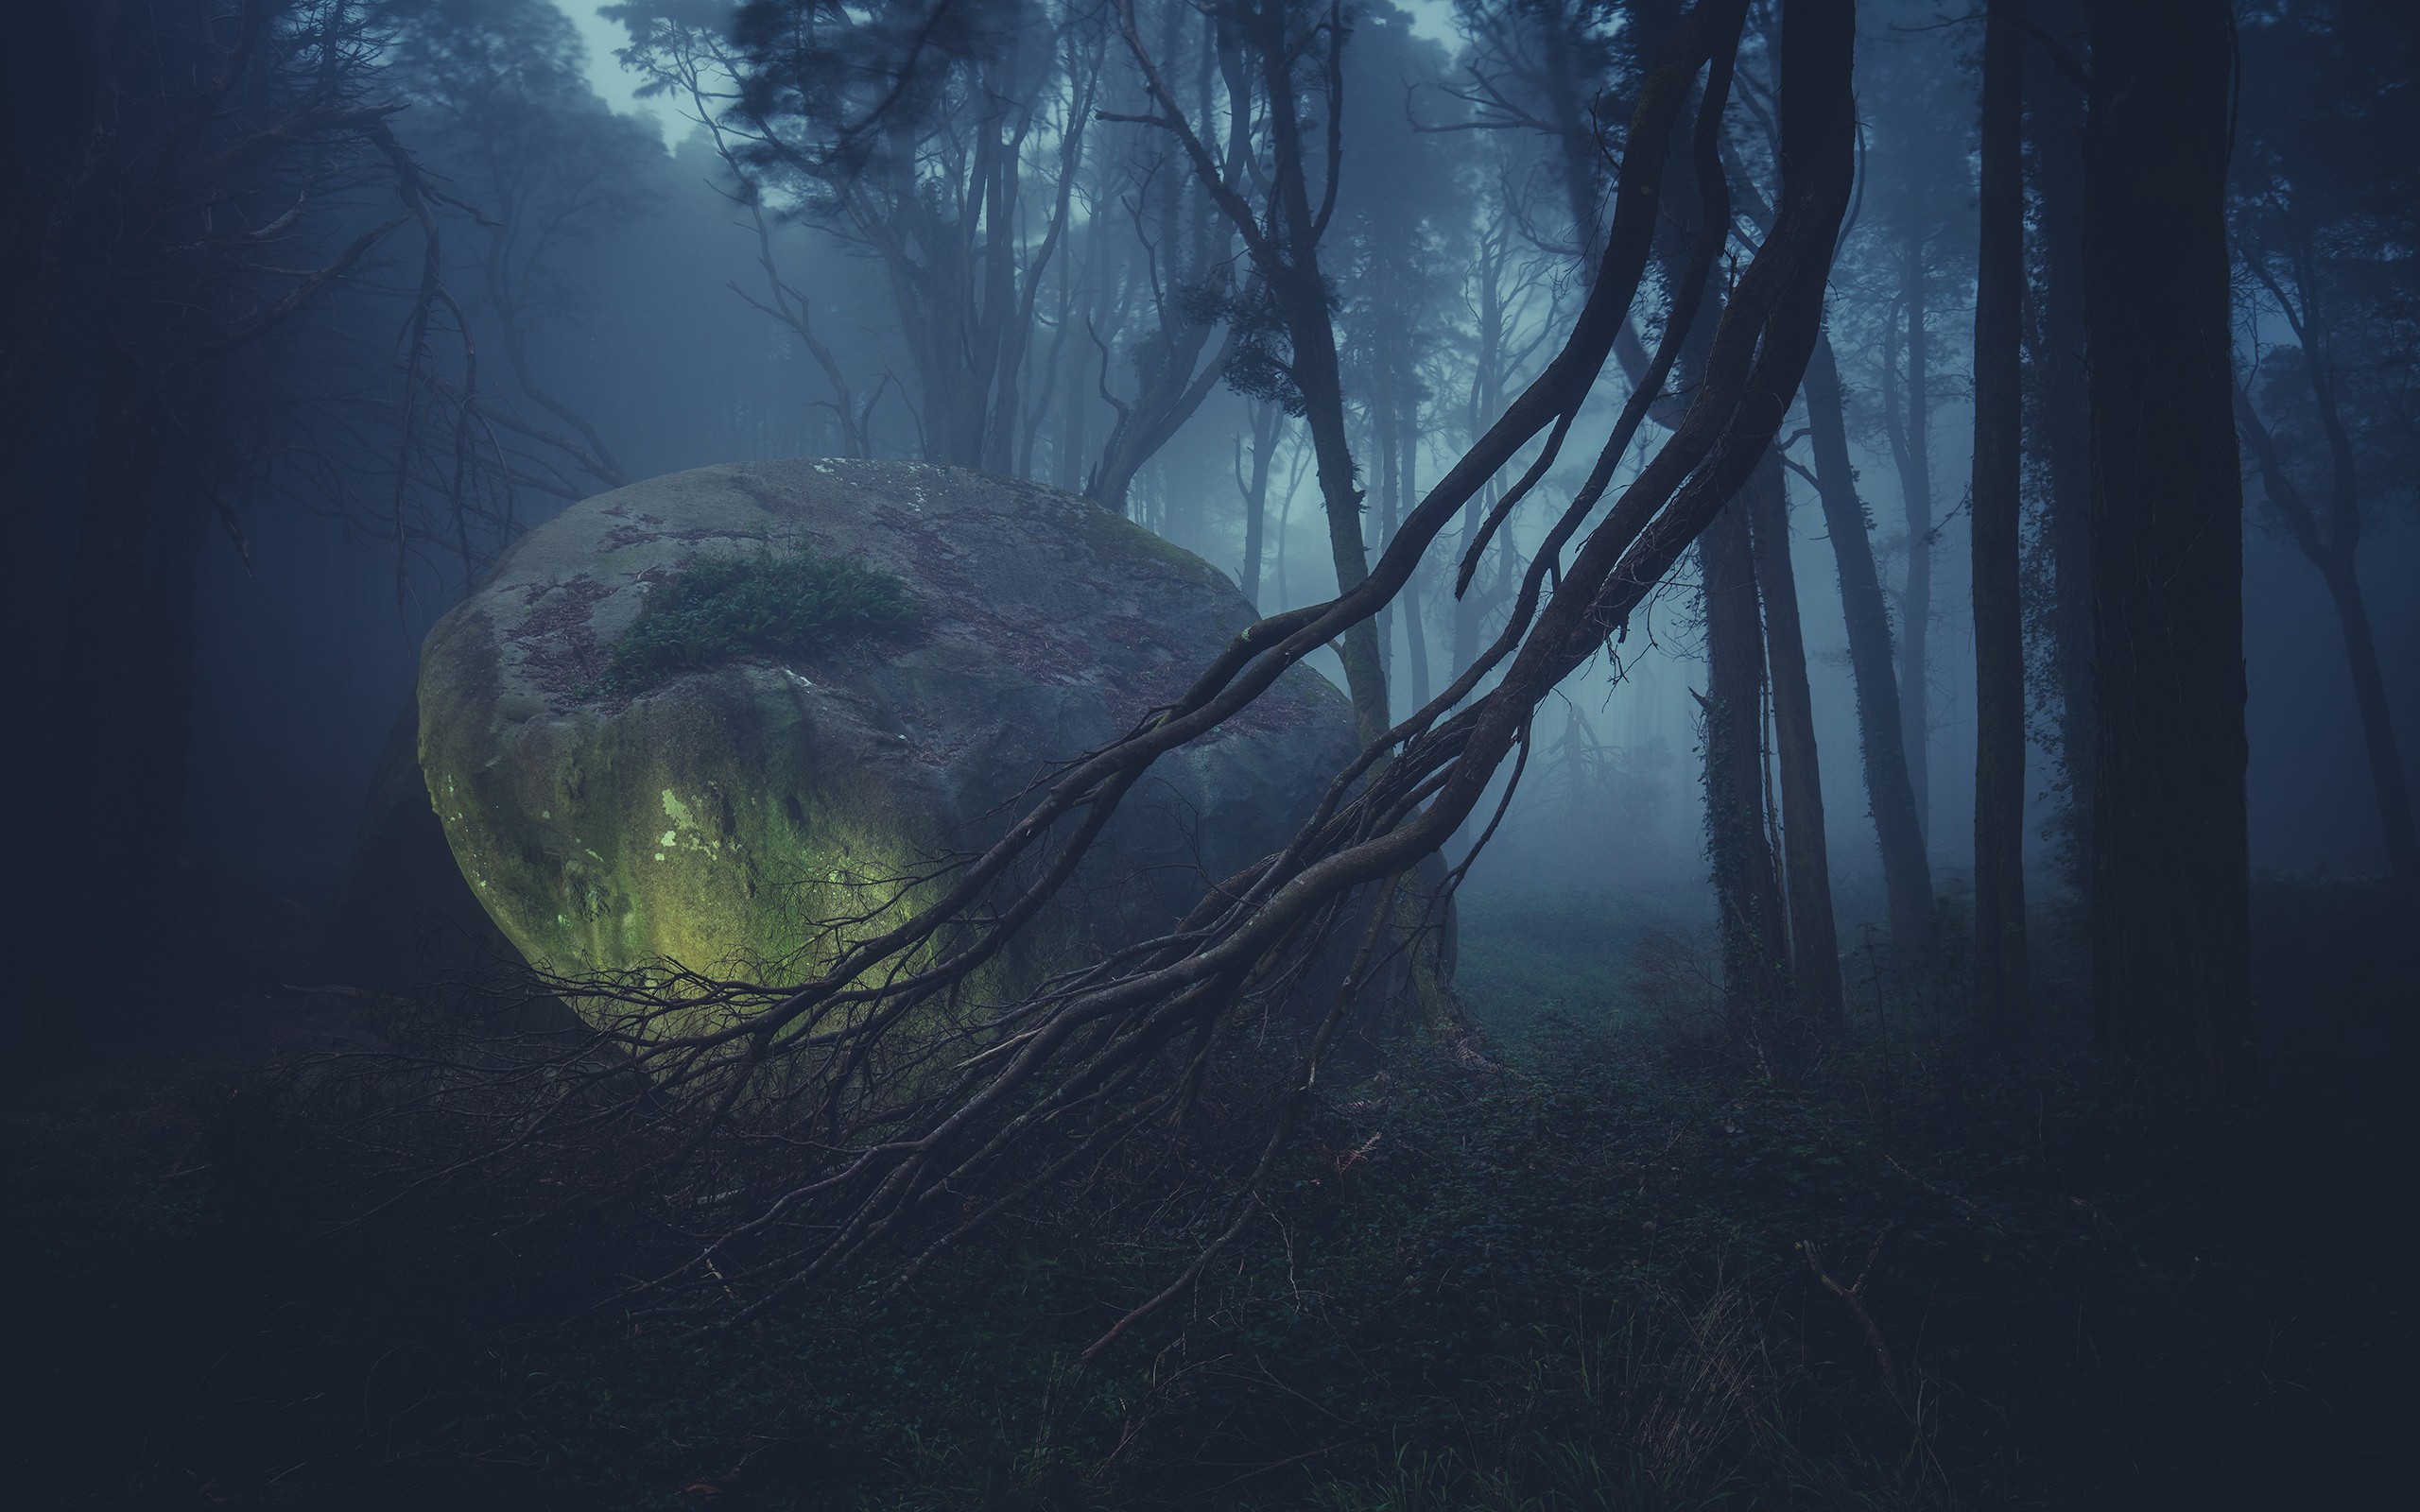 General 2560x1600 forest rocks mist deep forest branch nature creepy trees plants low light